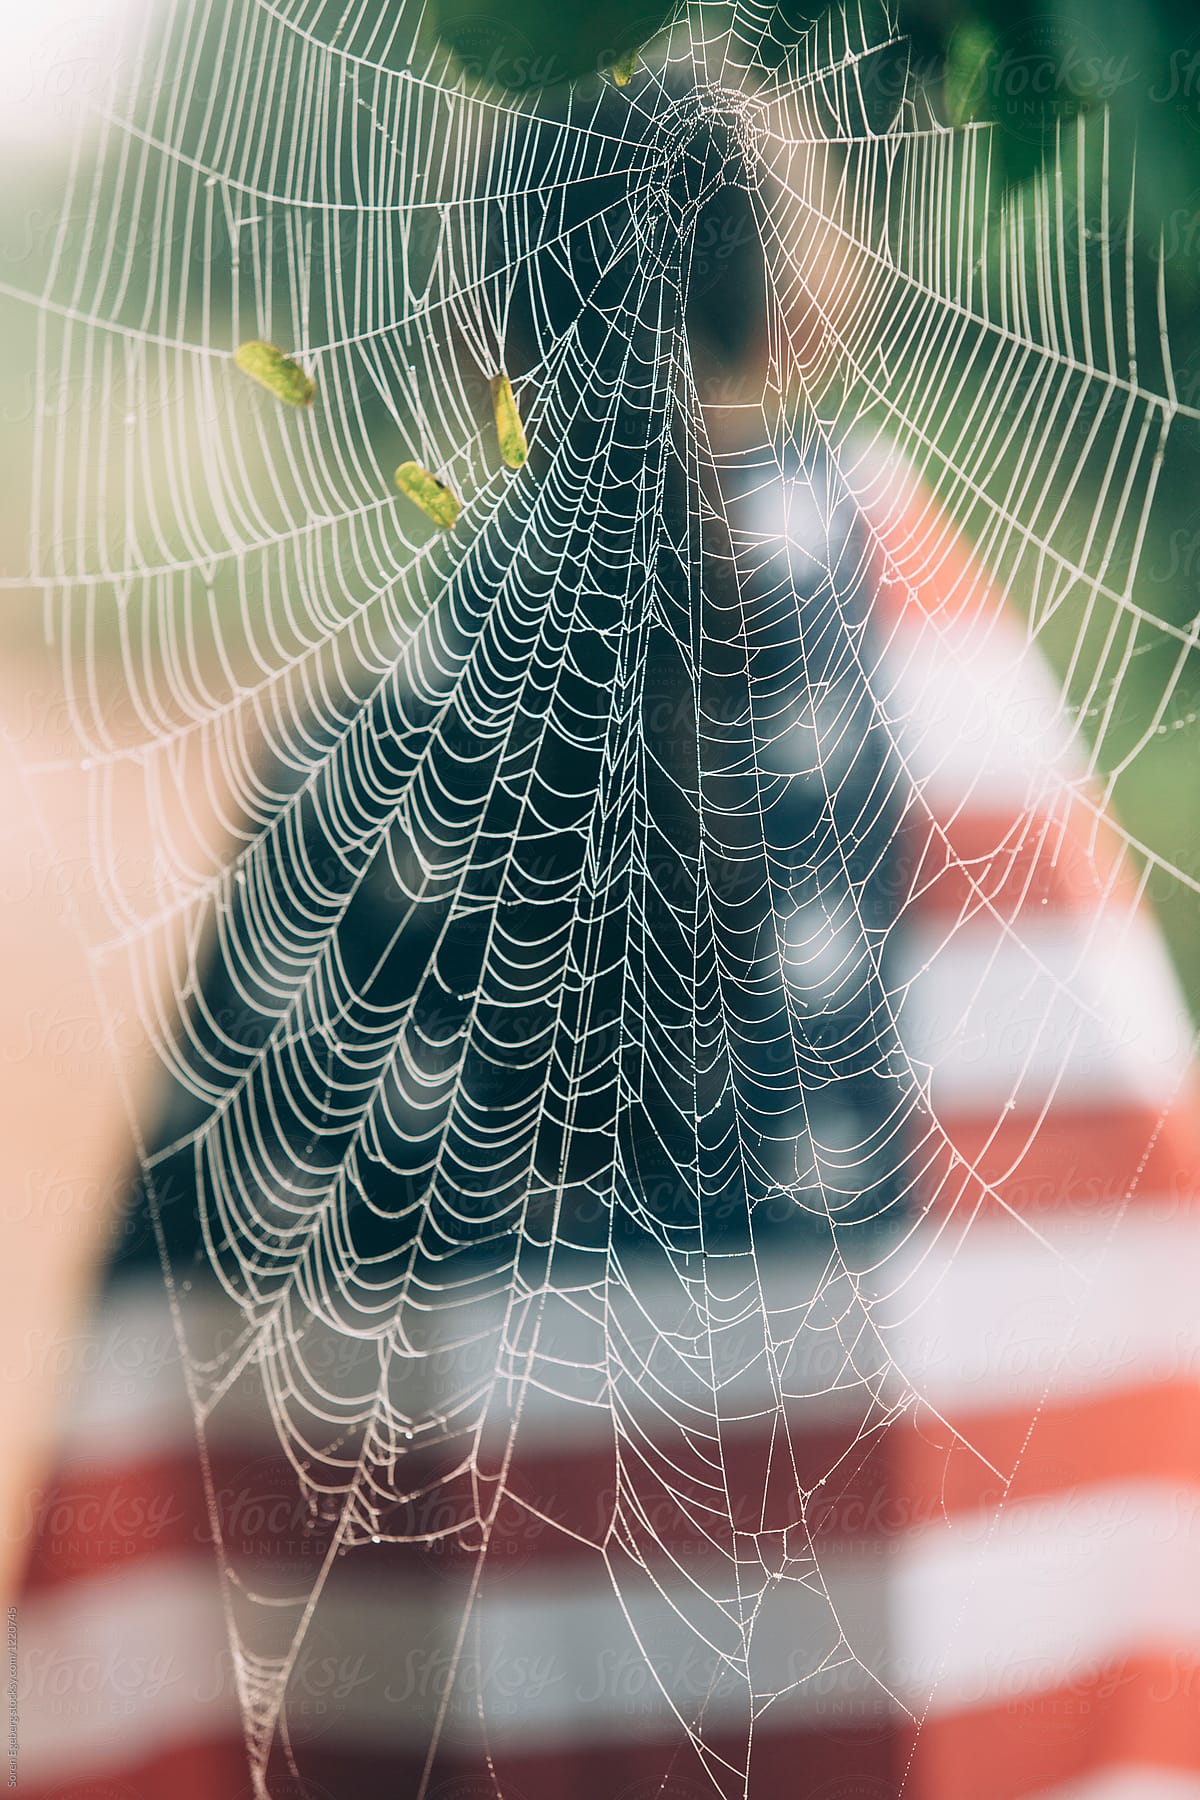 American flag covered by a spider web or cobweb